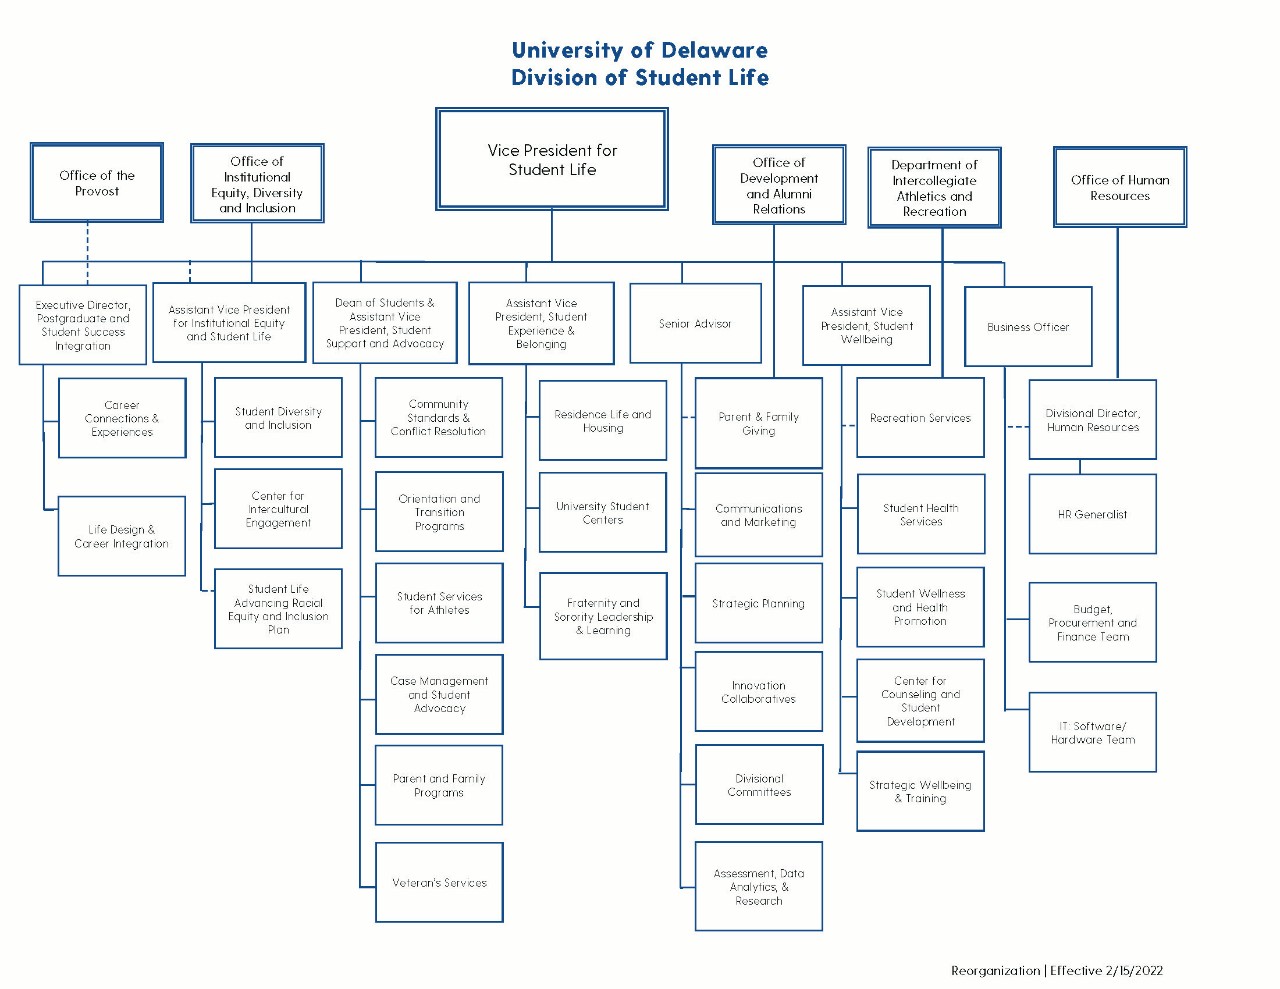 Division of Student Life Organizational Chart